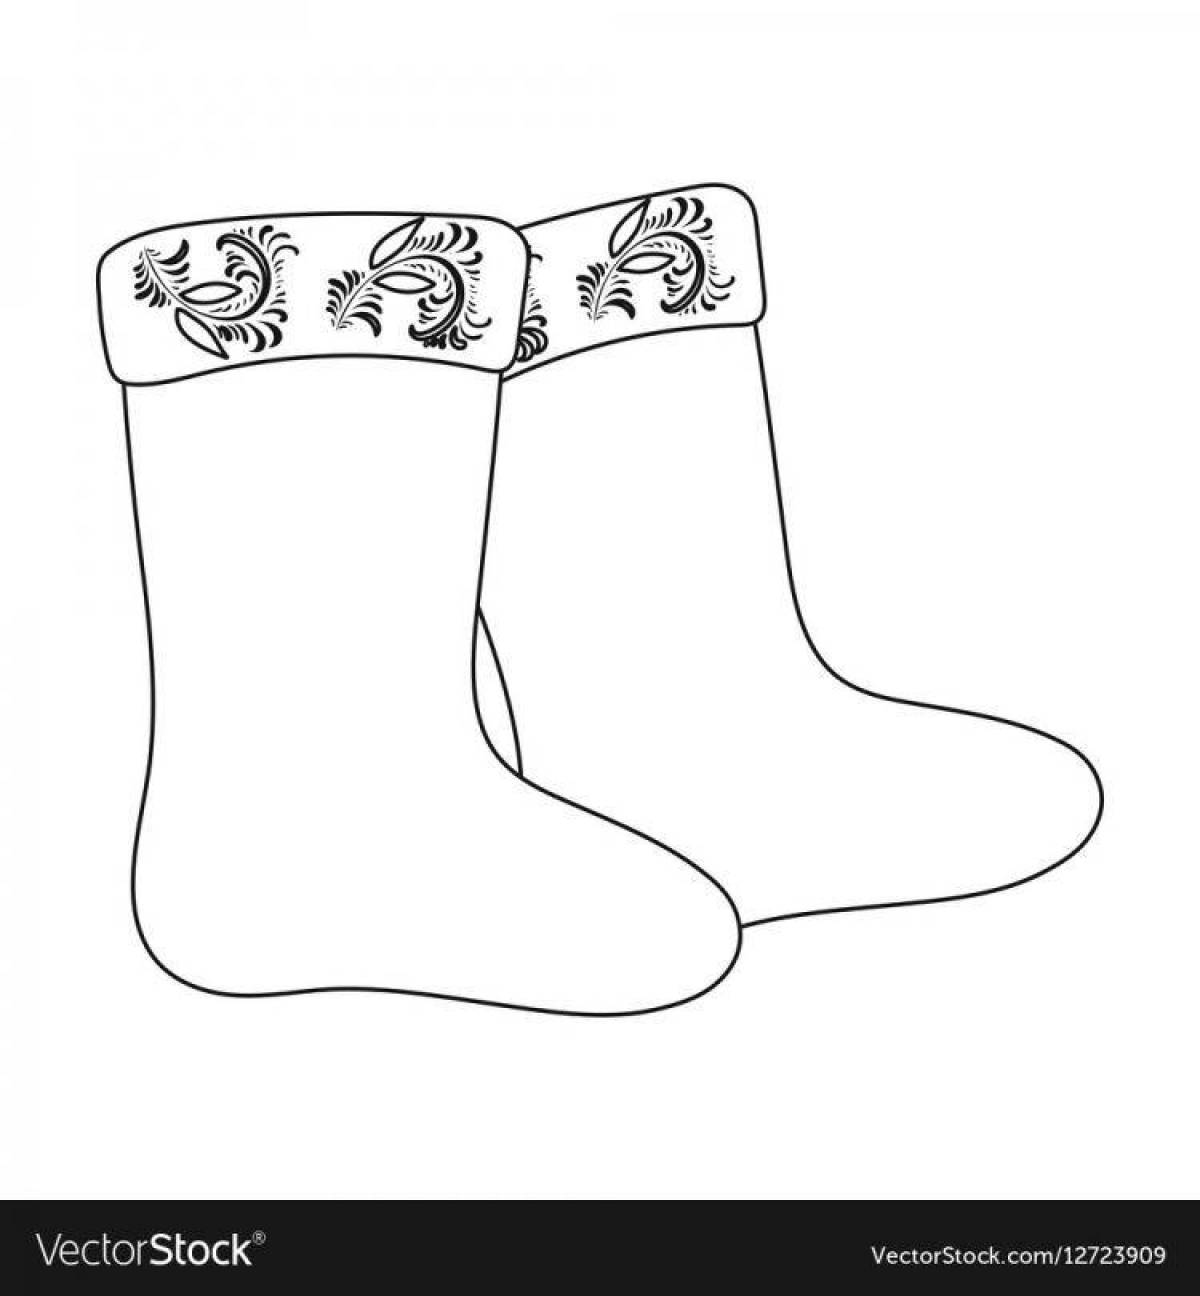 Amazing boots coloring for kids